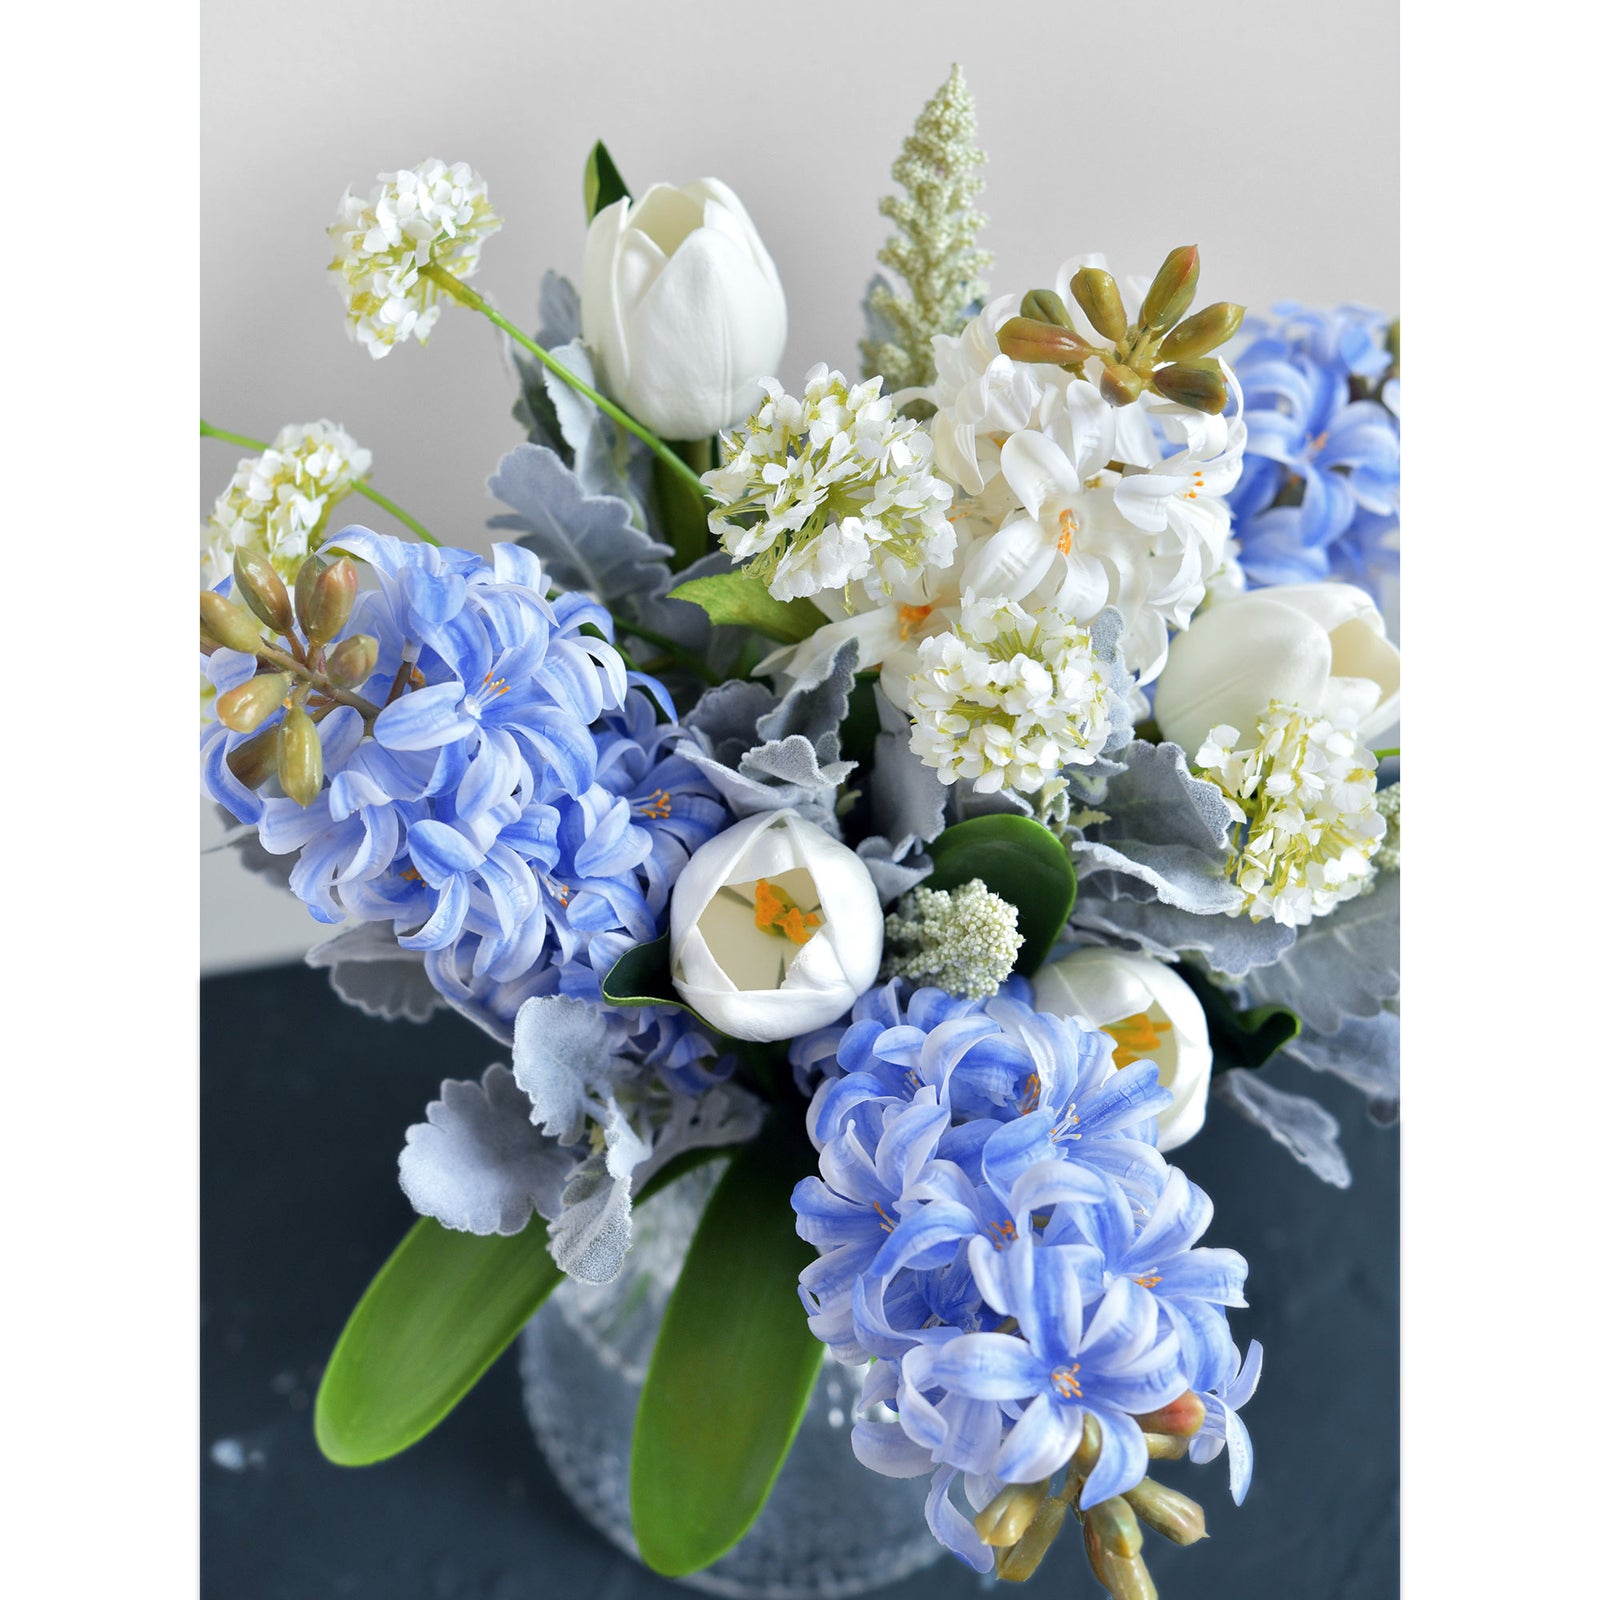 Real Touch Hyacinth (Tranquil Blue) Artificial Flowers ‘Petals Feel and Look like Fresh Hyacinth' Wedding, Home Decor, Arrangement 2 Stems